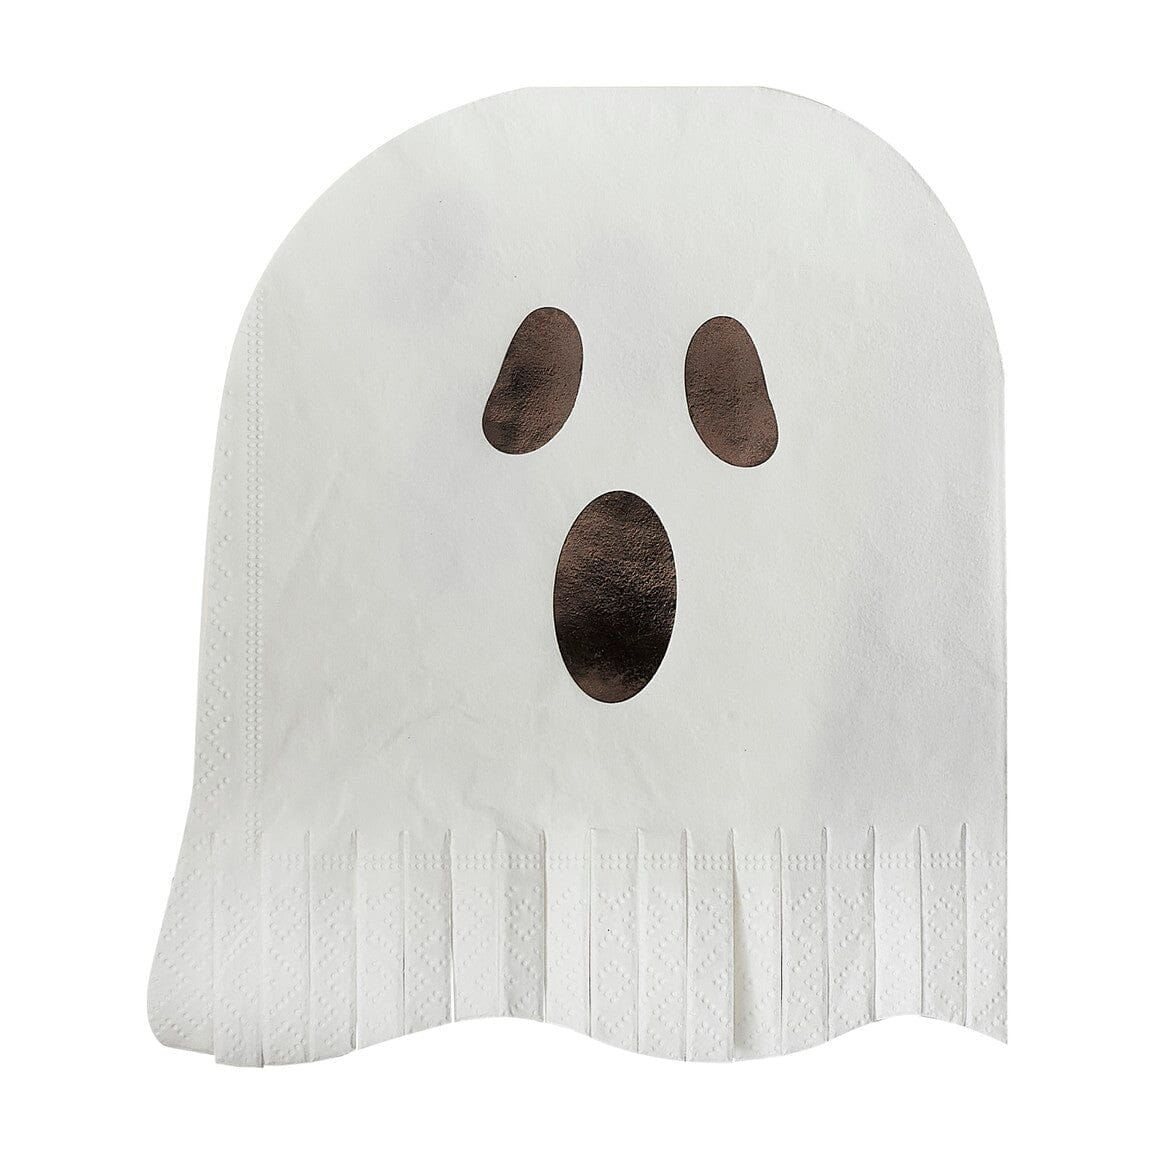 Ghost Fringe Paper Halloween Napkins Lucy & Me 